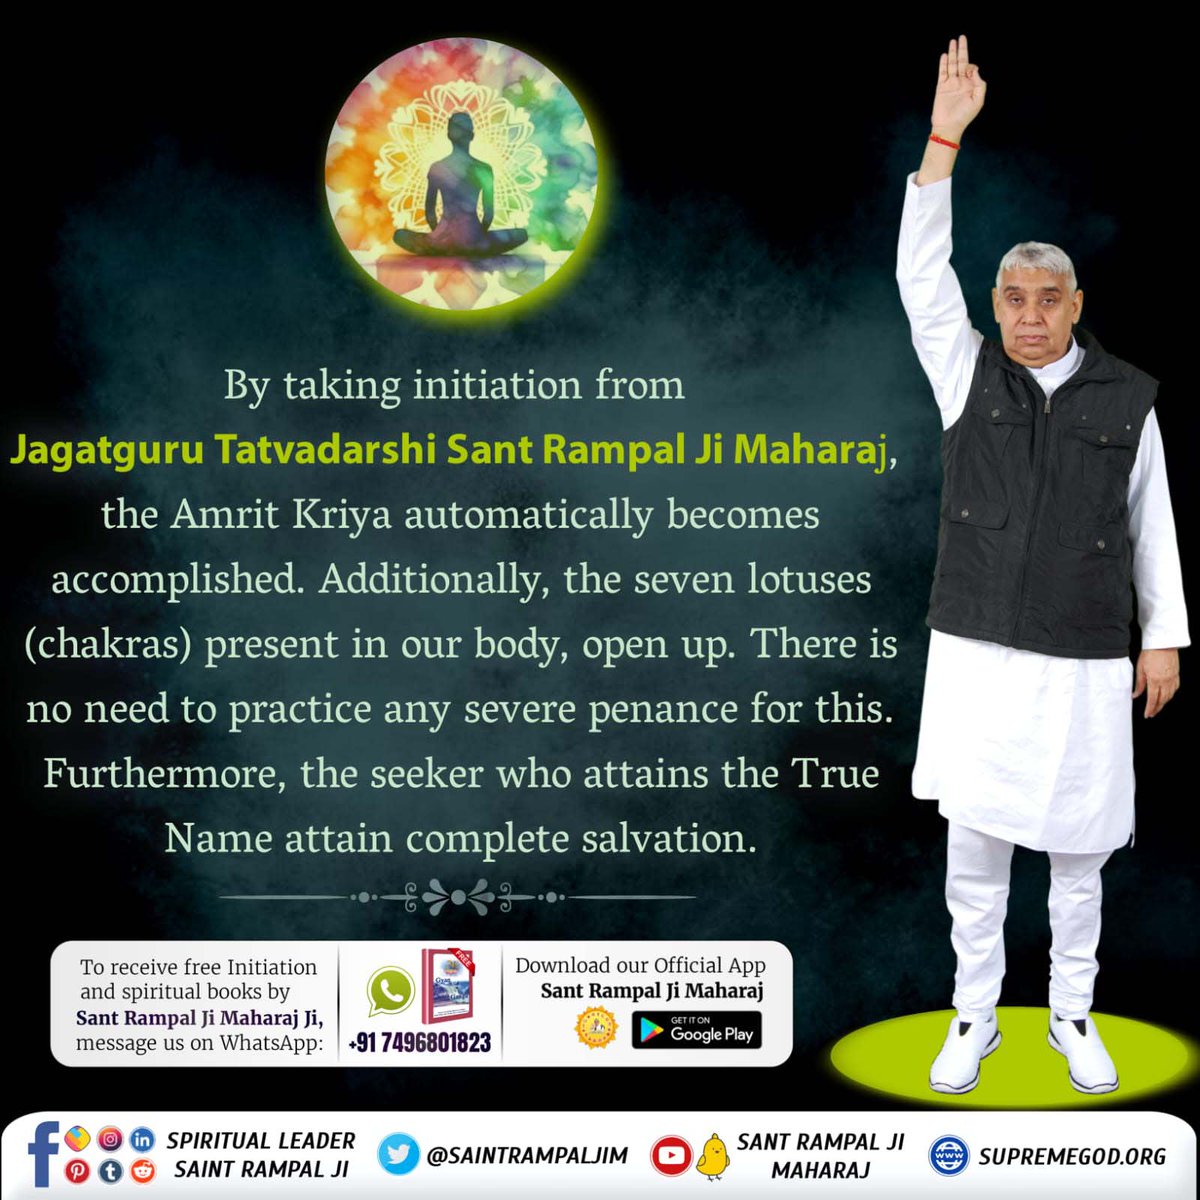 #What_Is_Meditation Meditation simply means controlling your senses through constant practice. But the Perfect Saints say that such practice gives temporary benefits and has nothing to do with salvation. Sant Rampal Ji Maharaj